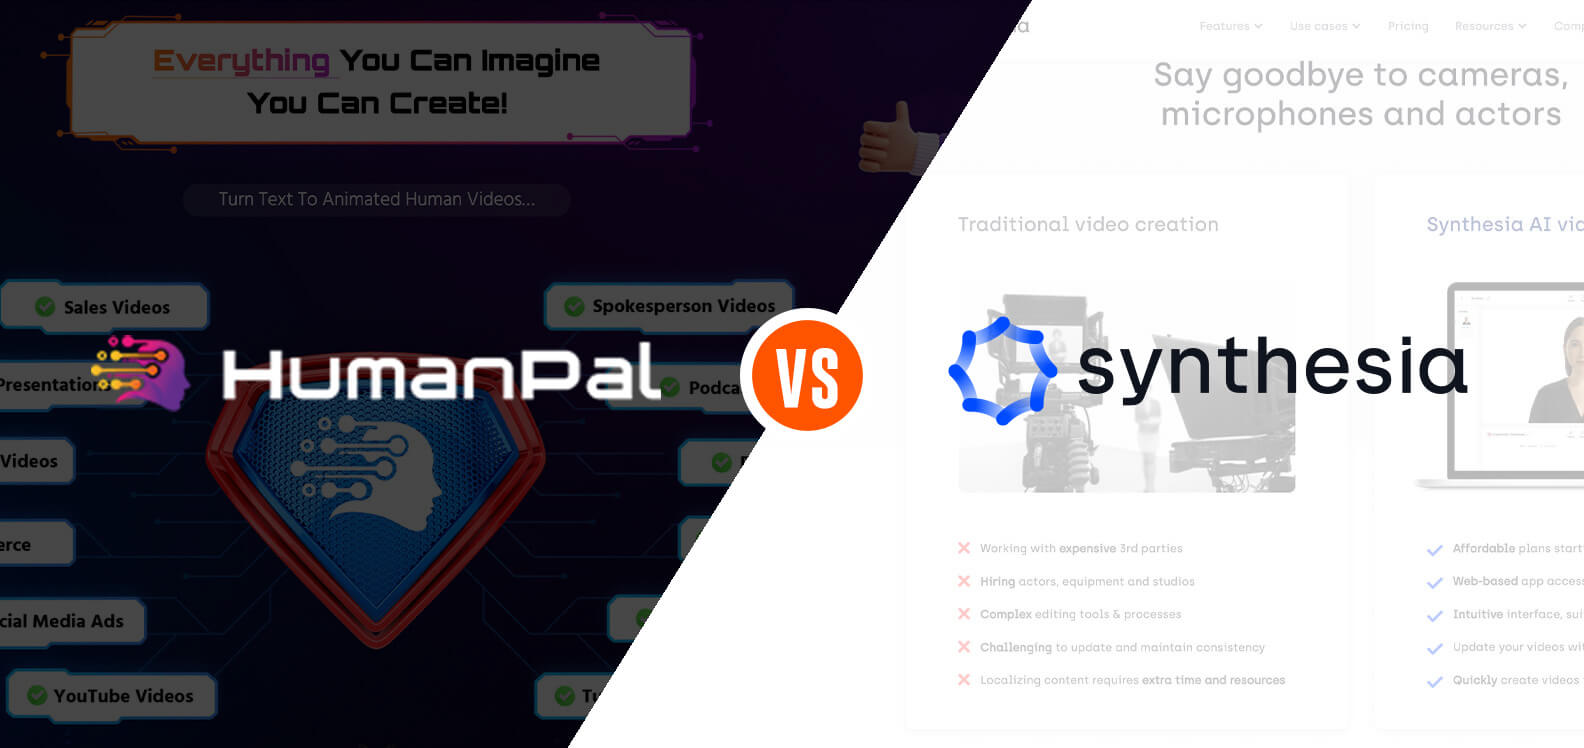 Post: Video Creation Showdown: Synthesia and HumanPal Comparison